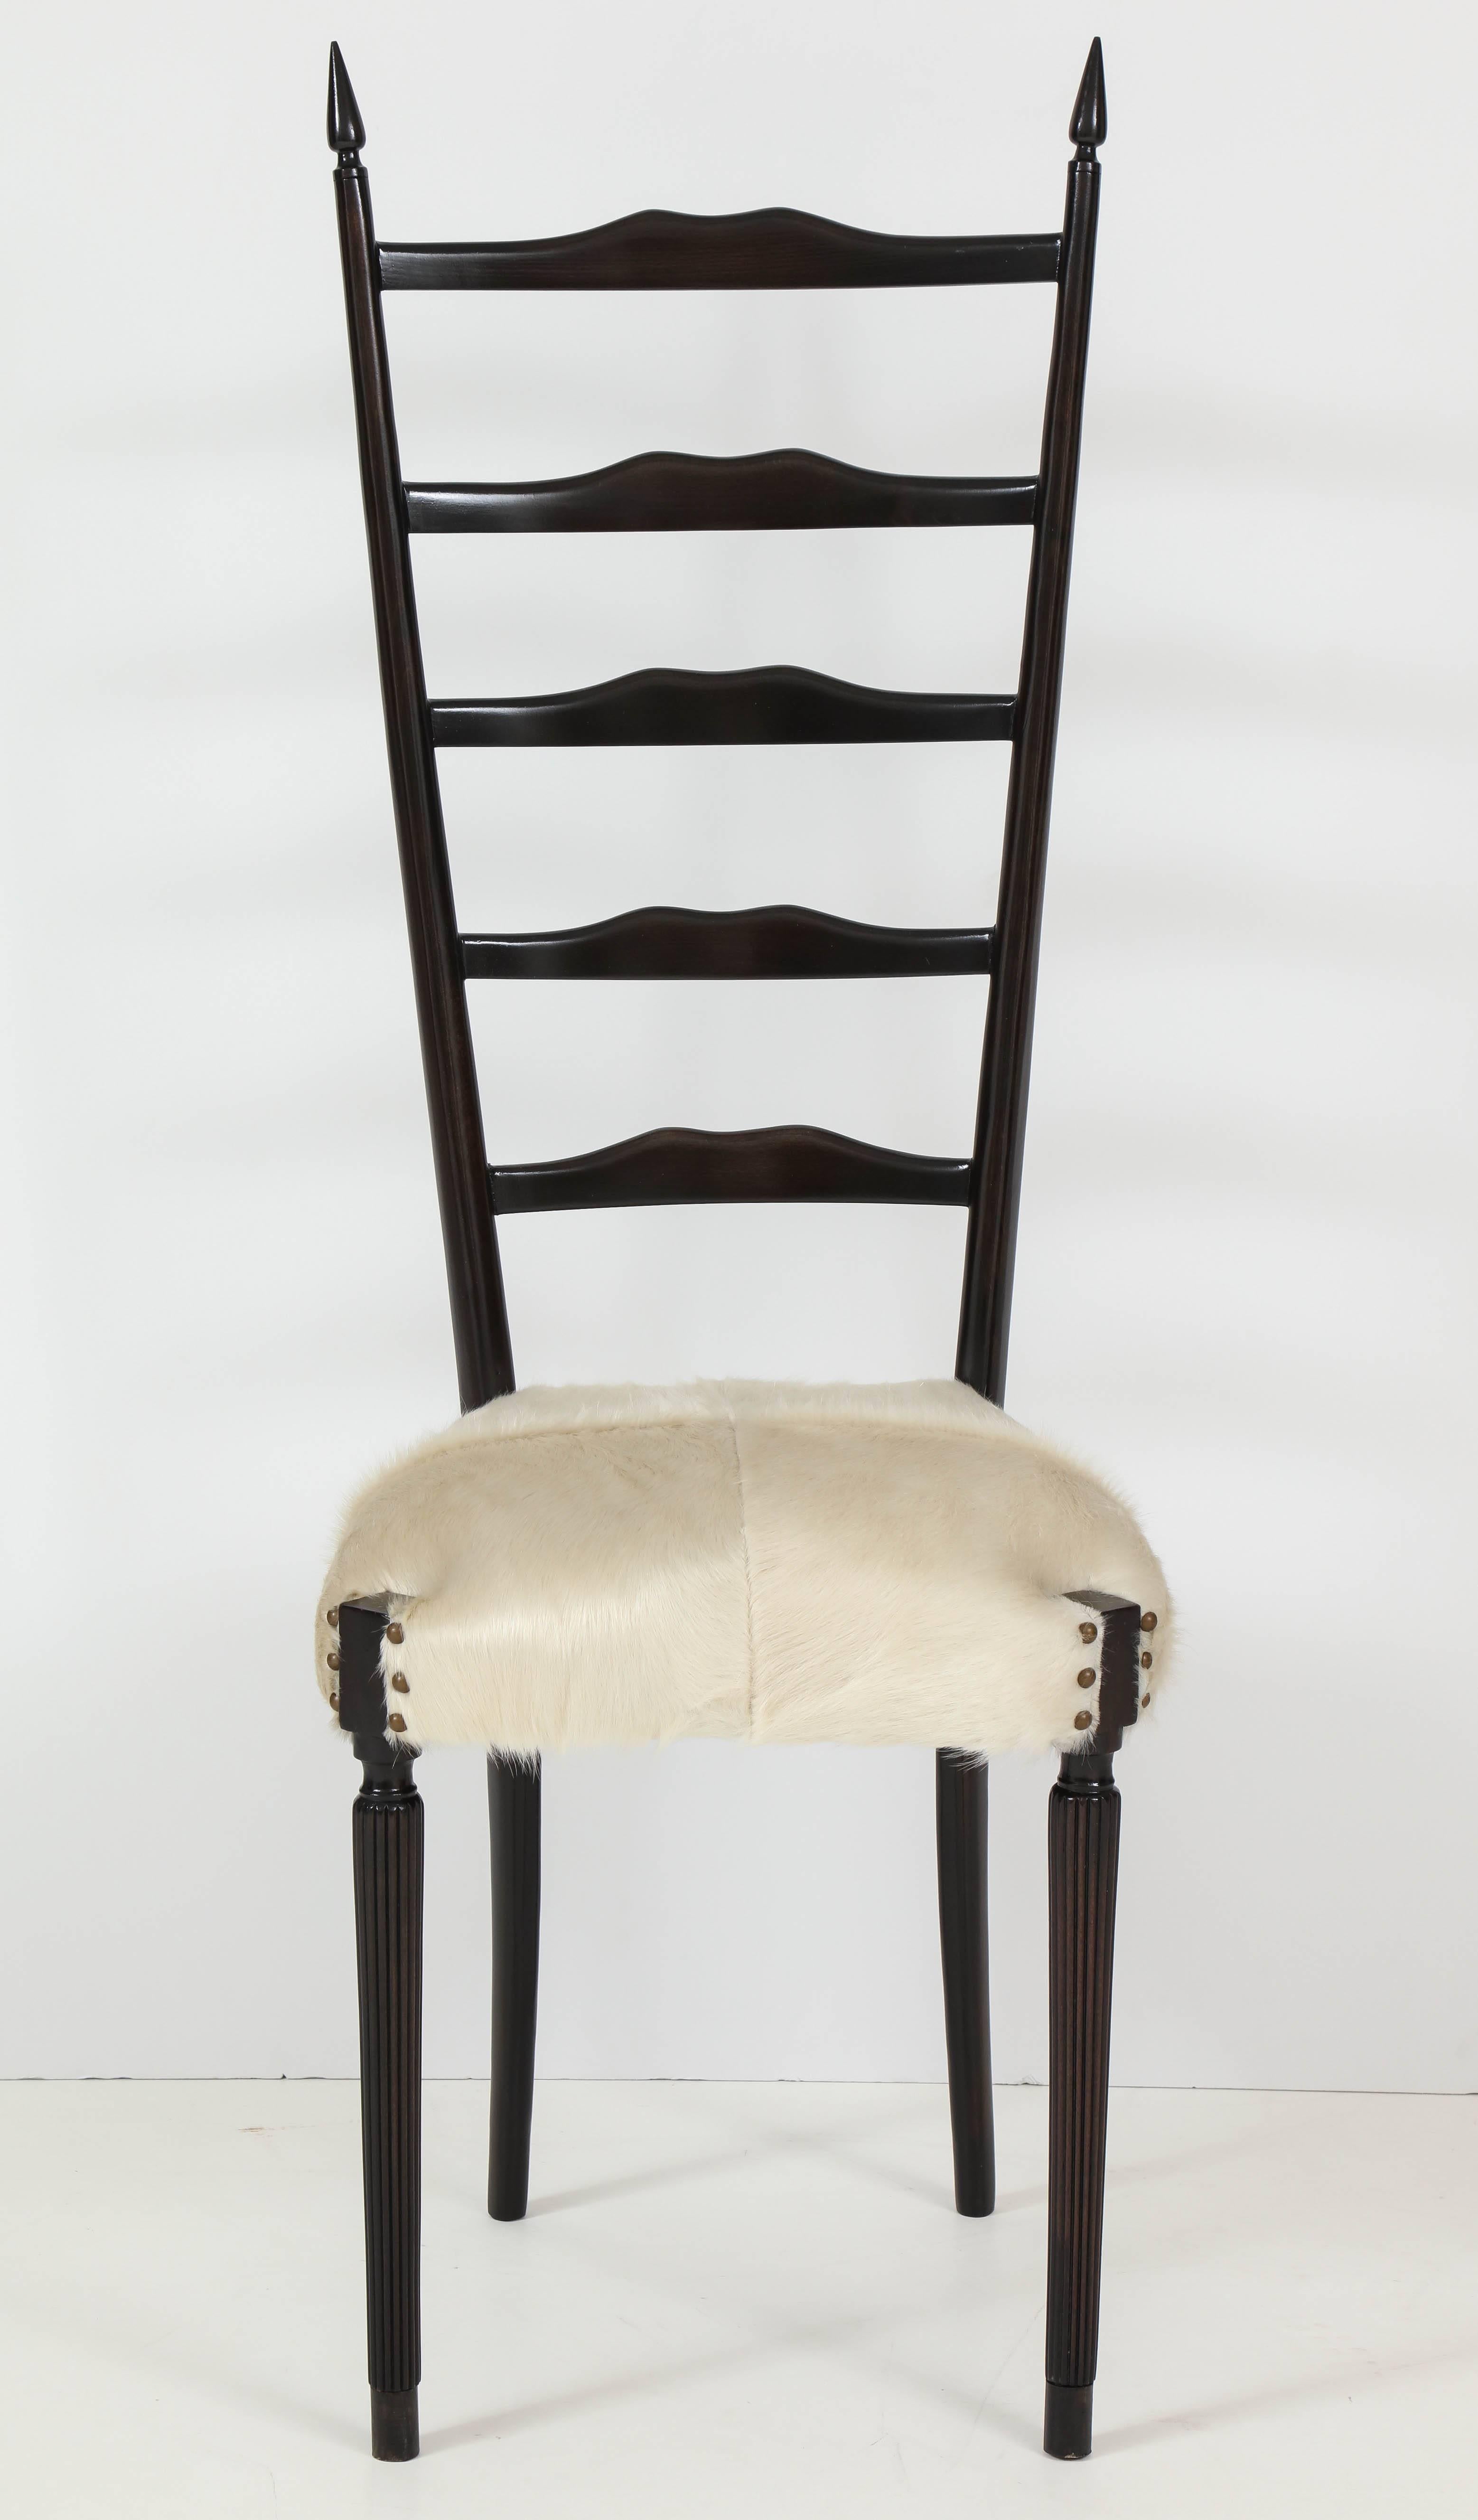 Pair of Italian Mid-Century ebonized walnut framed side chairs with white calf skin upholstery. Chairs have been mint restored with retied springs, foam and webbing and feature bone white calf upholstery. Chairs have fluted front legs and back have